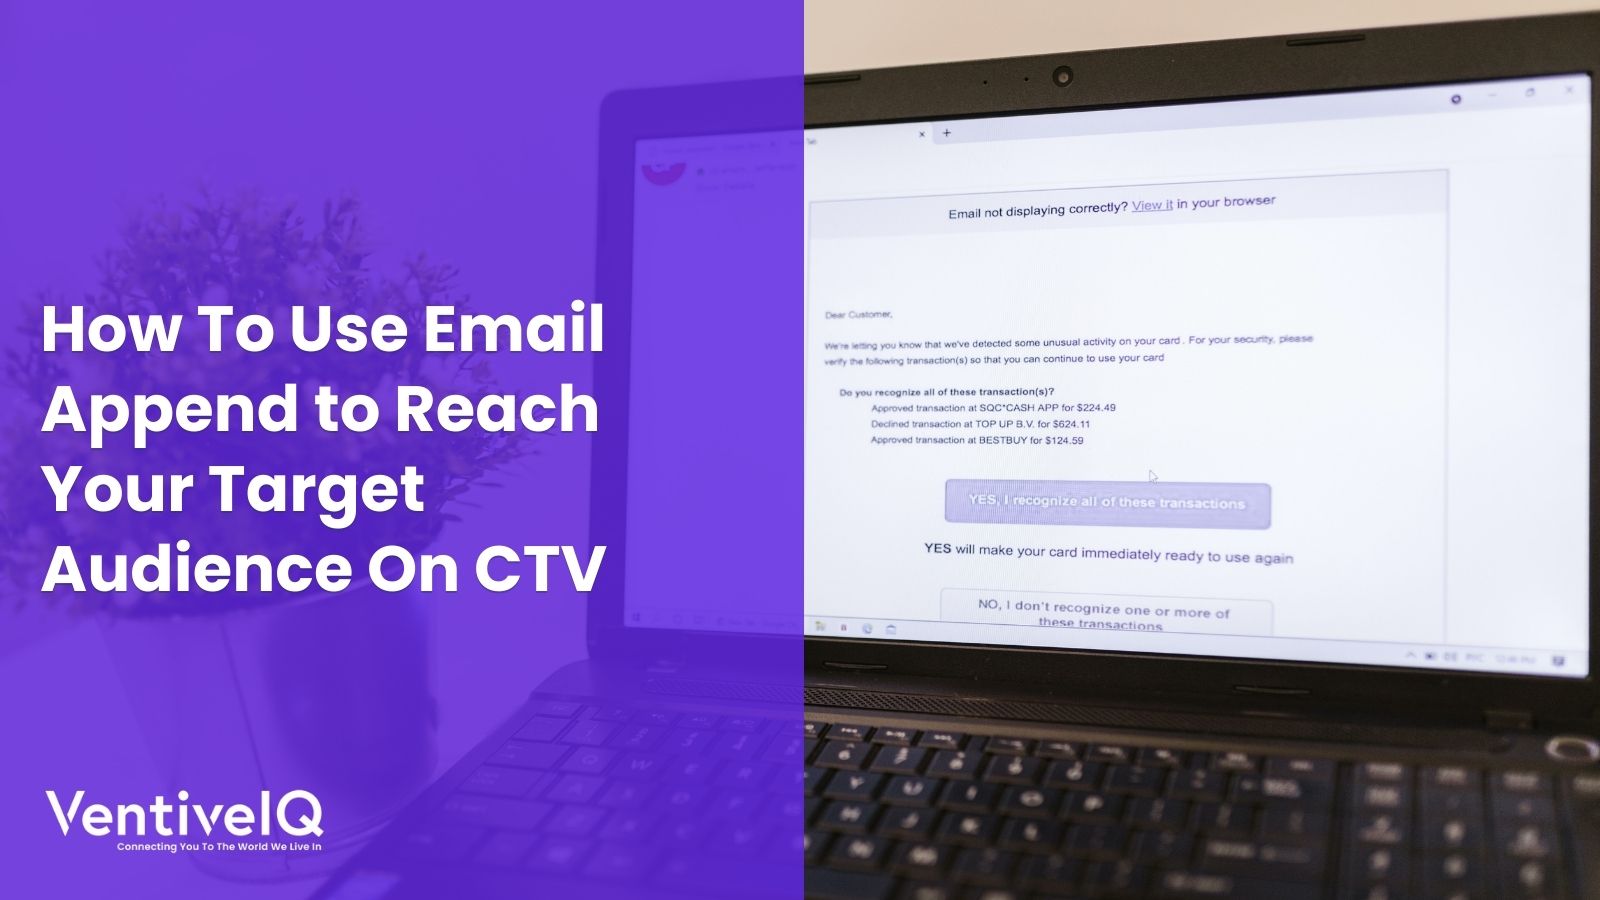 How To Use Email Append to Reach Your Target Audience On CTV